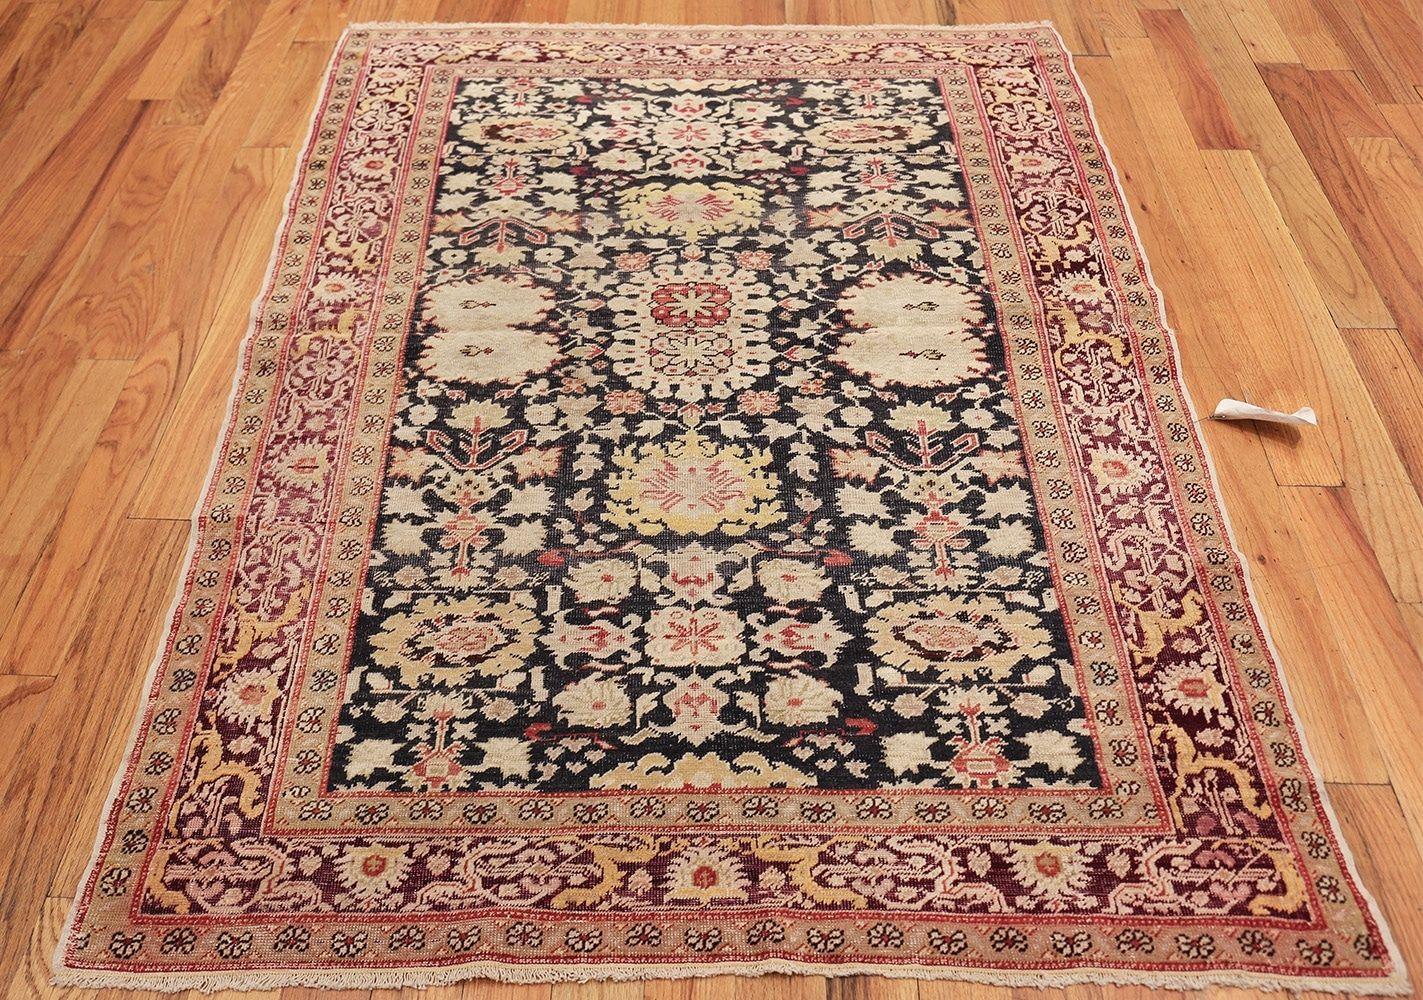 A beautiful small size Antique Turkish Sivas rug, Turkey, early 20th century. Size: 4 ft 3 in x 5 ft 8 in (1.3 m x 1.73 m)
